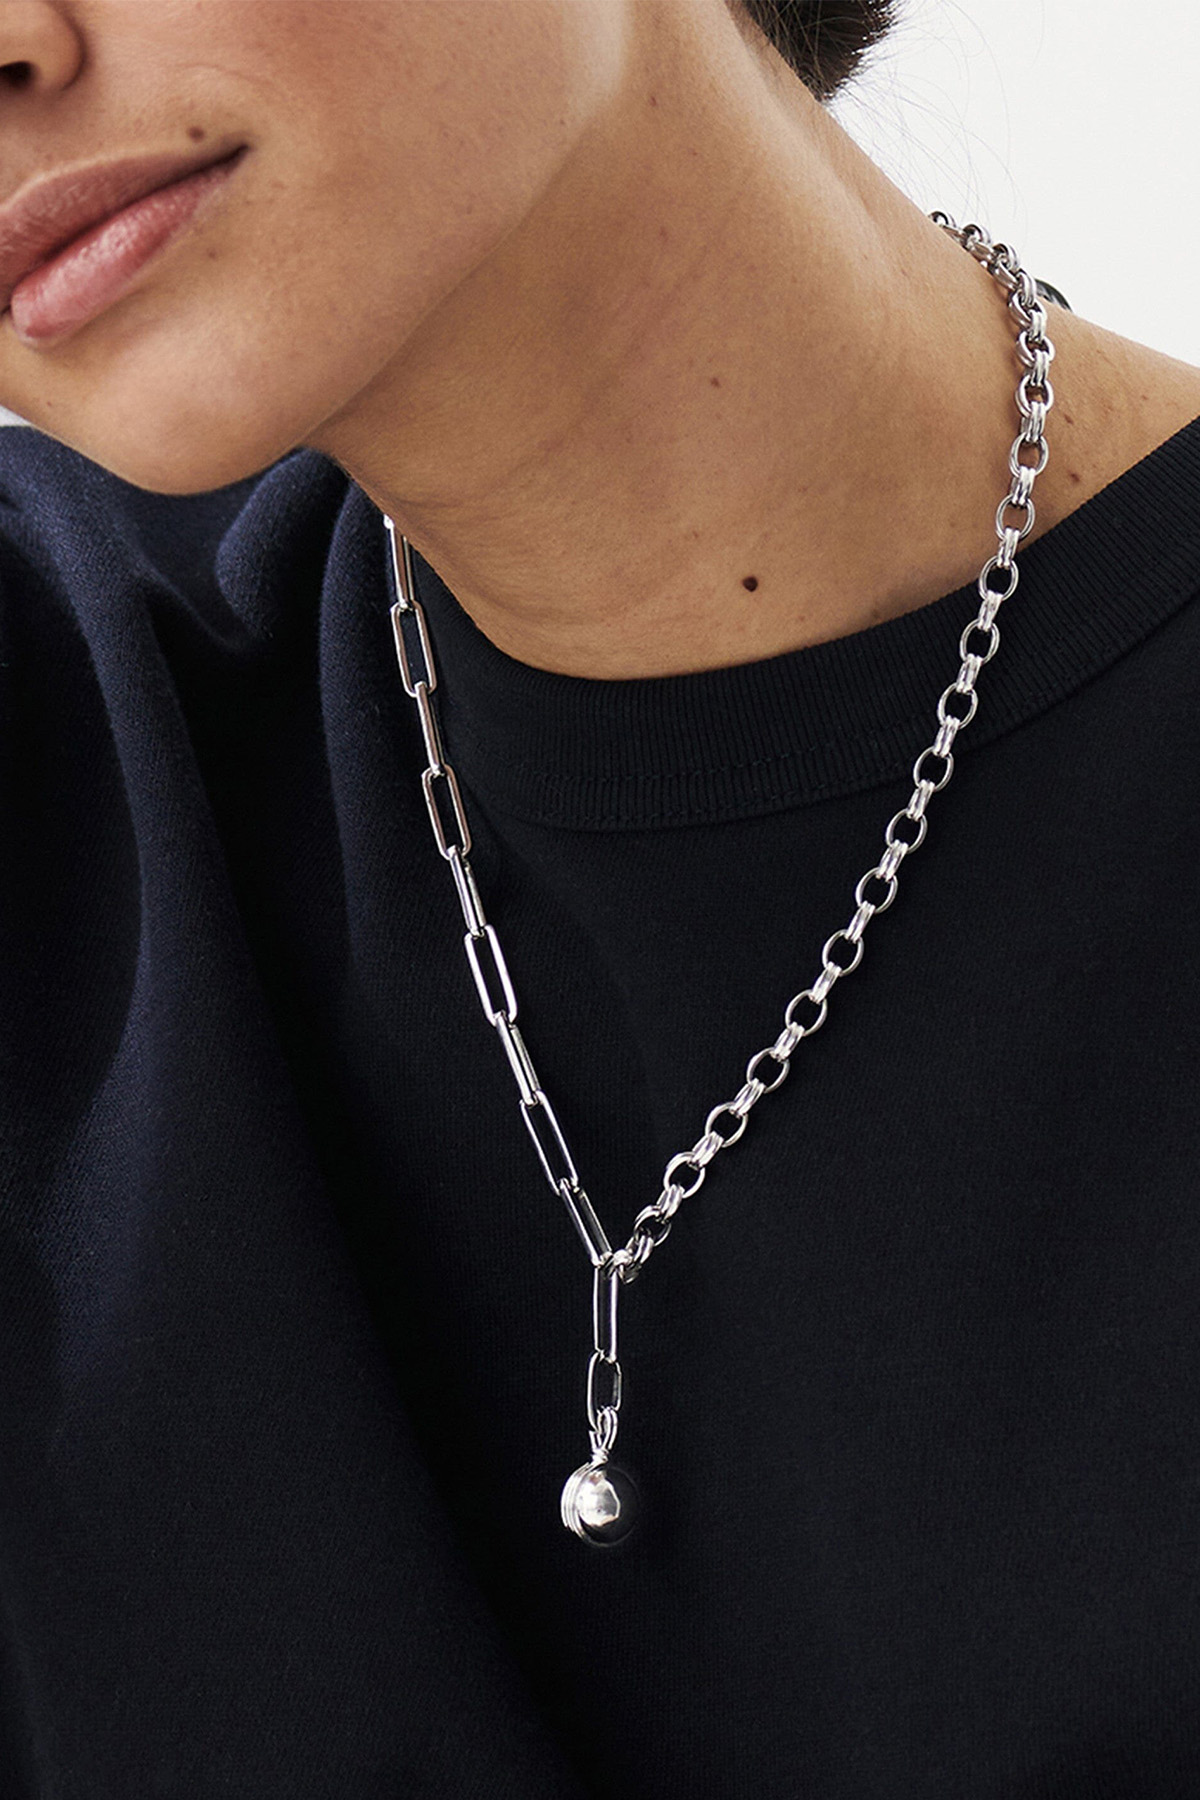 Deconstructed Axiom Small Sphere Chain Necklace | Silver Plated